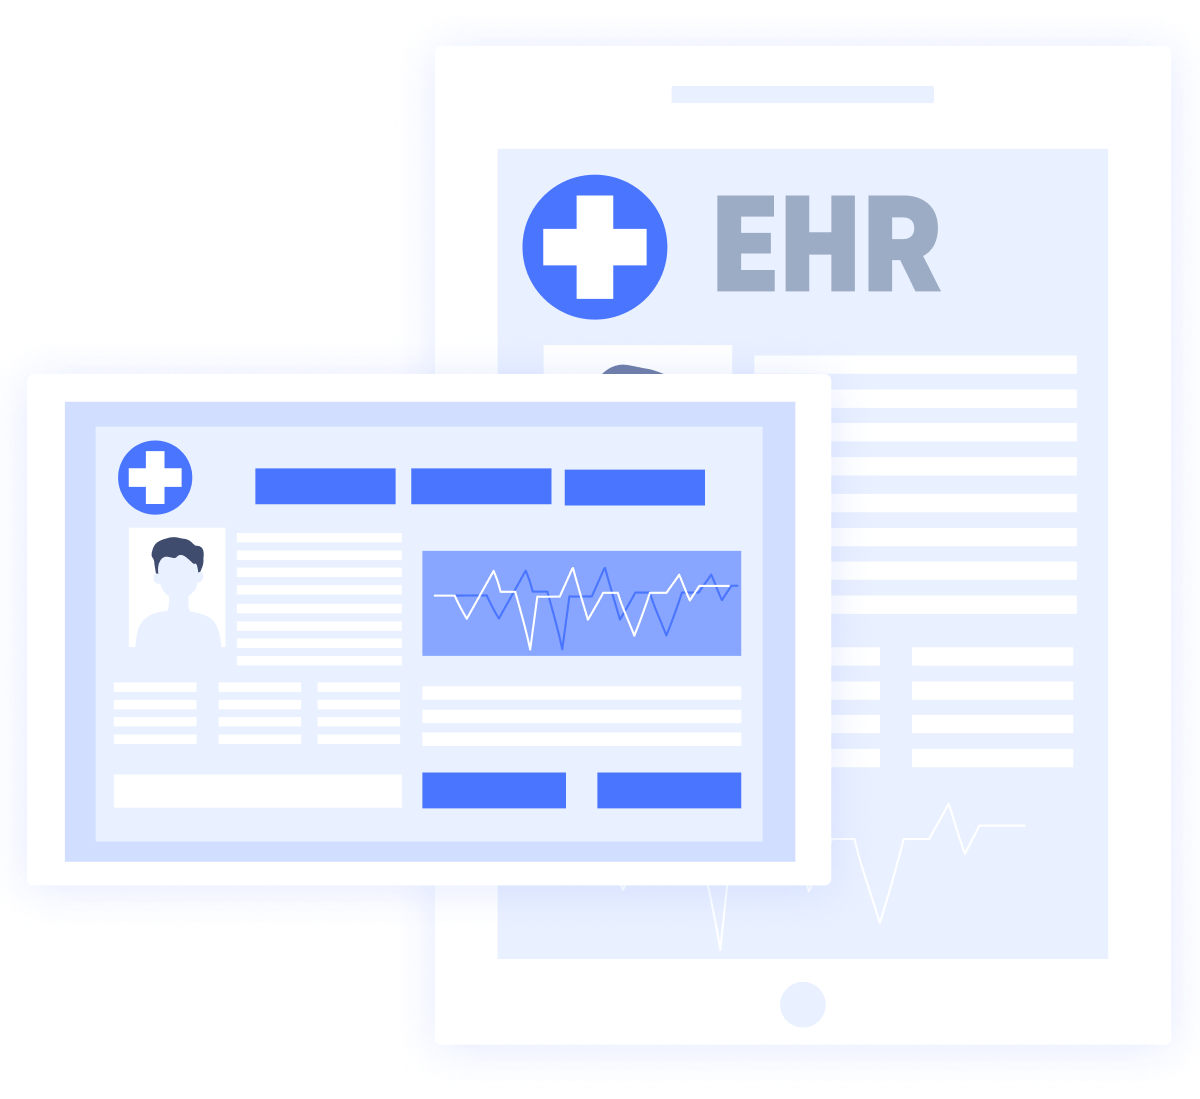 EHR or Electronic Health Record Medical Backend Cloud